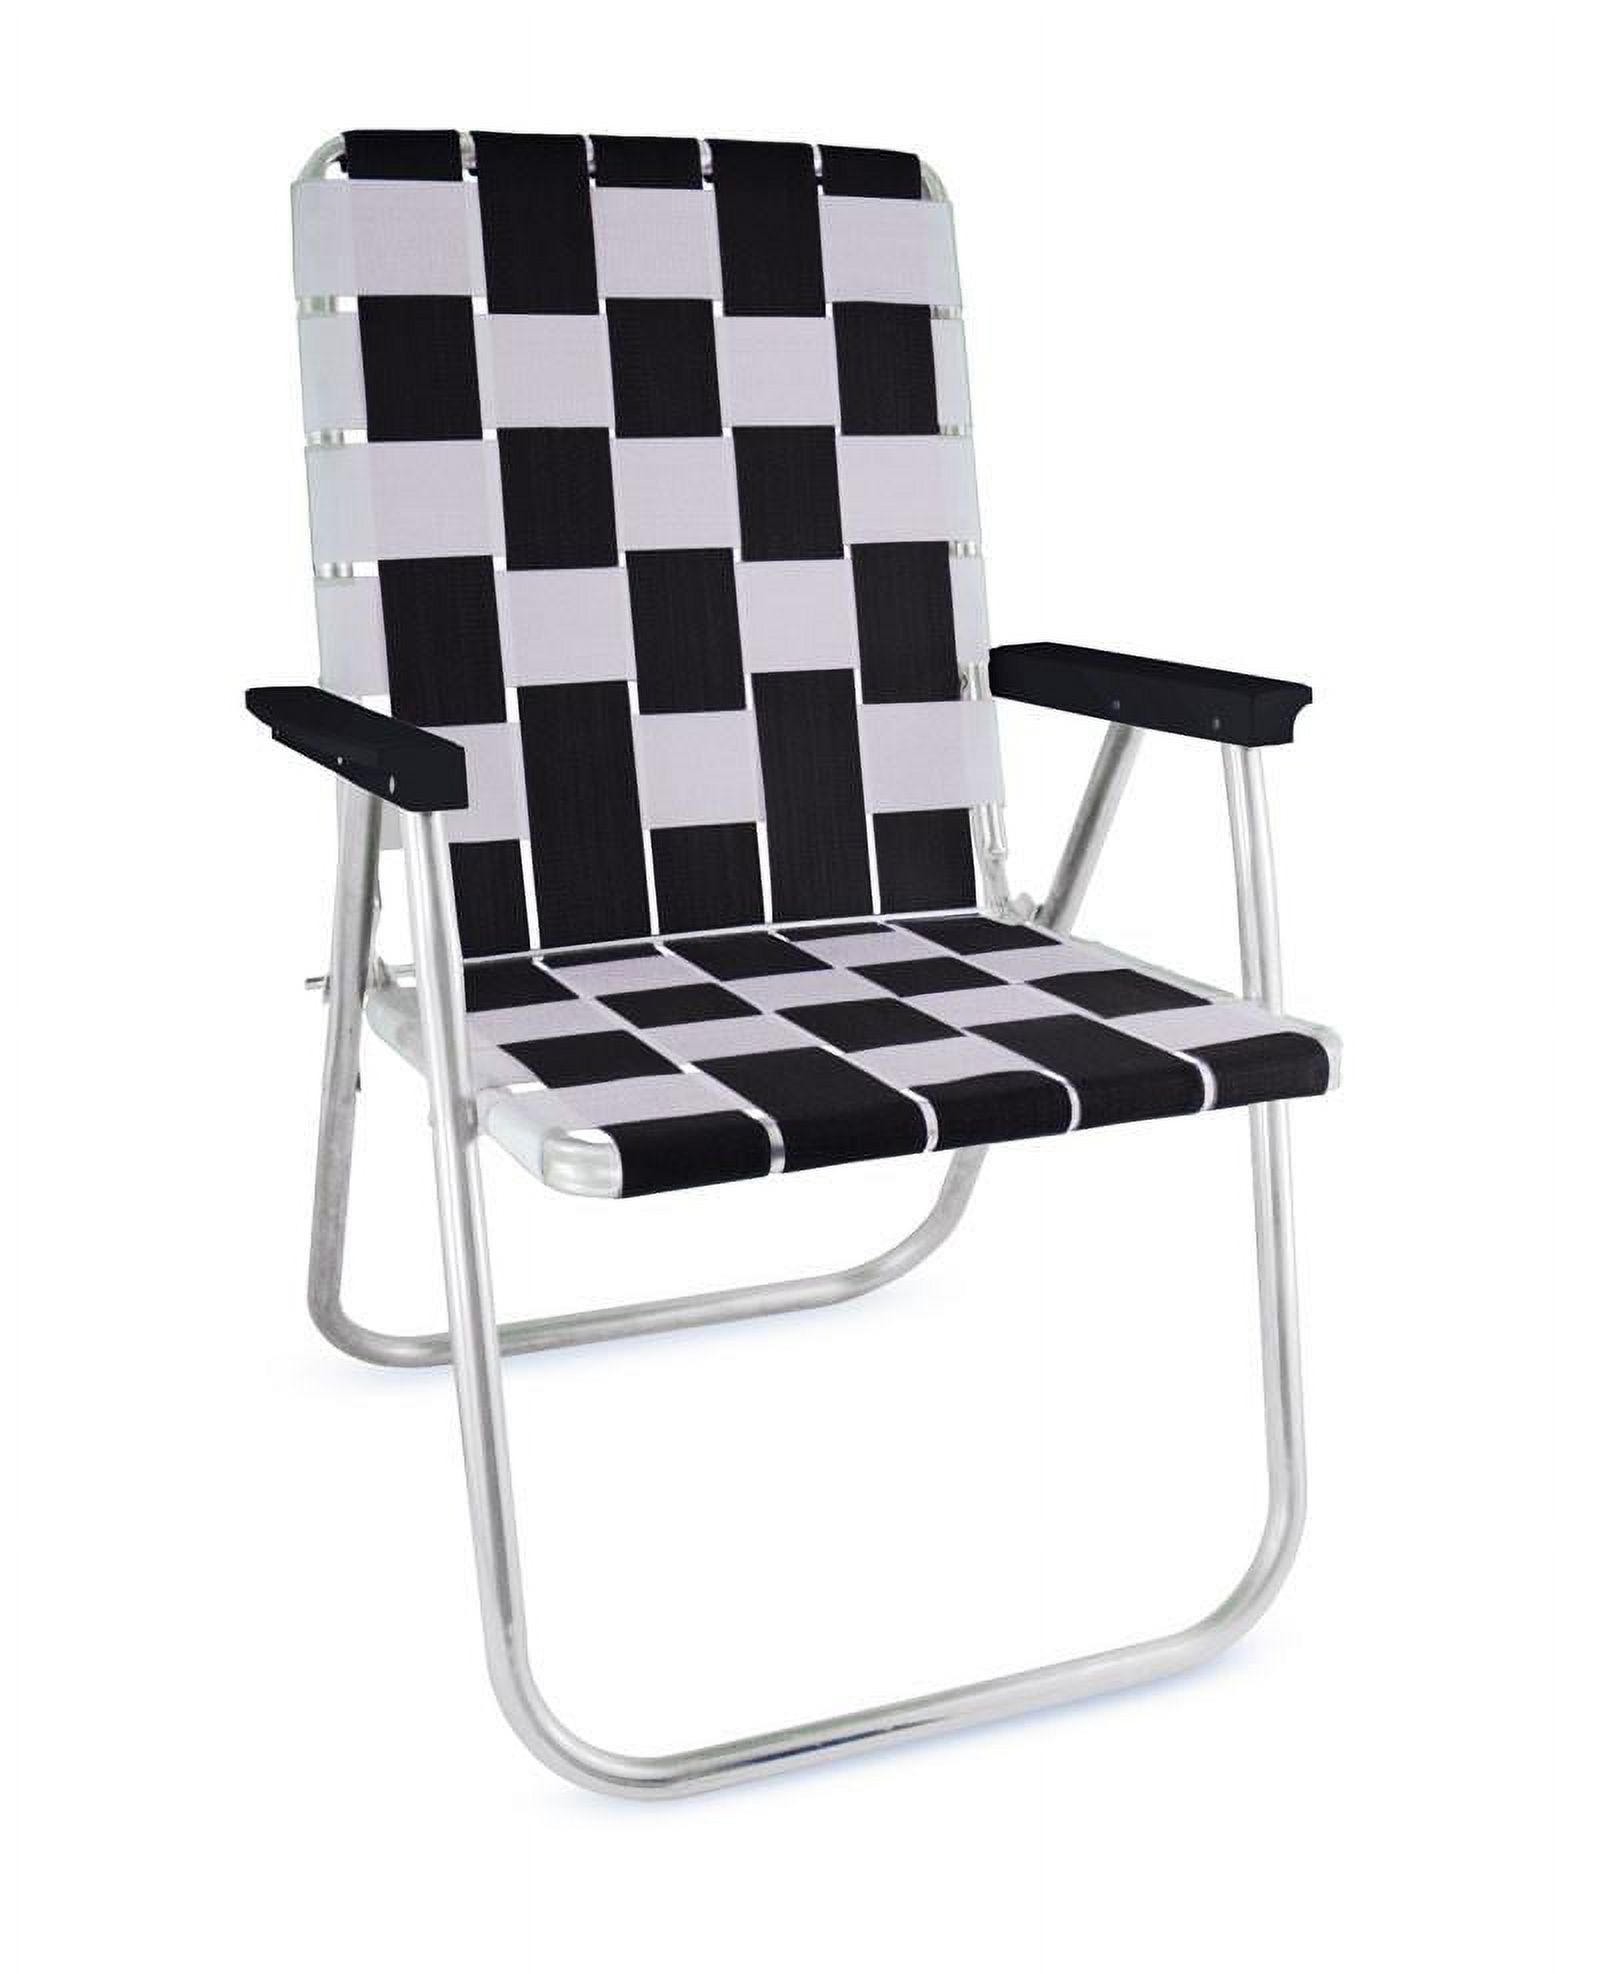 Lawn chair USA | Black and White Webbing | Crafted from UV-resistant polypropylene | Durable straps offer stylish replacement options for your outdoor seating | Long-lasting comfort and support - image 1 of 7